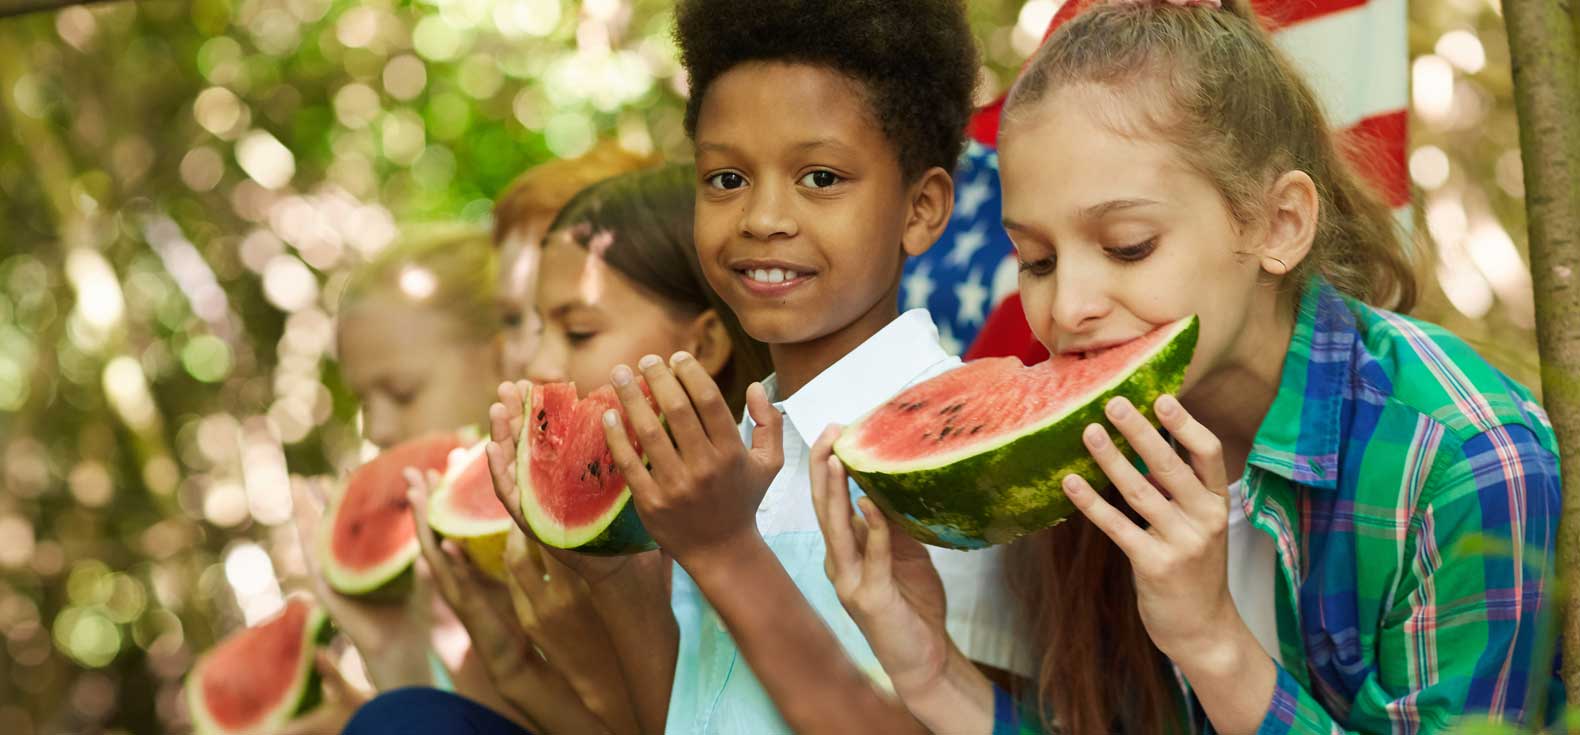 Kids at a watermelon-eating contest